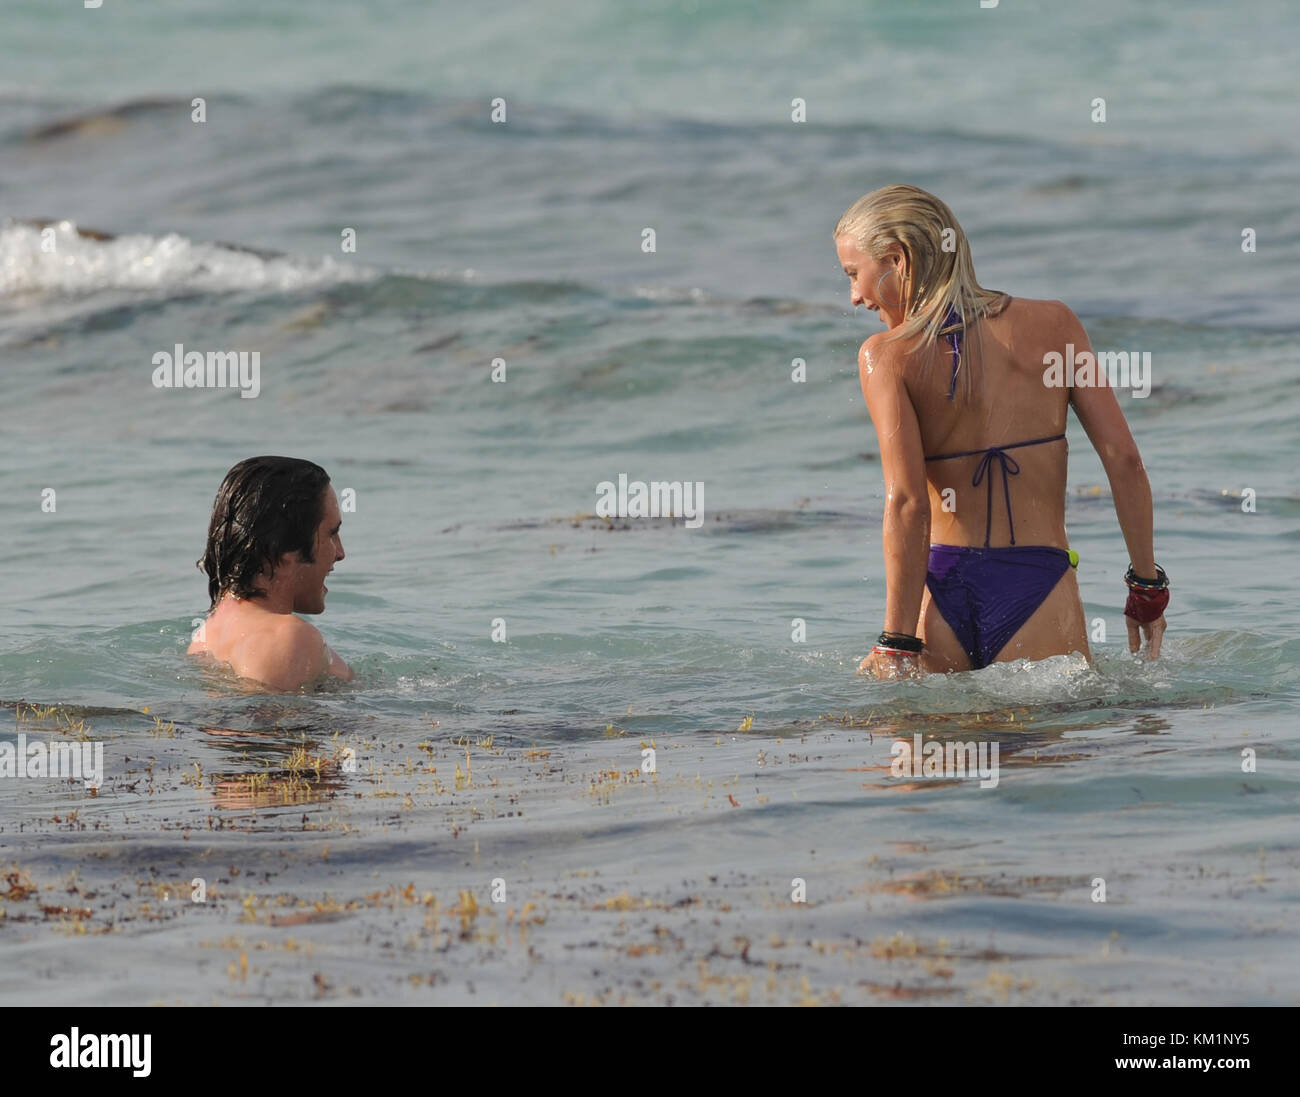 SMG Julianne Hough Diego Boneta Bikini Kiss 052311 94.JPG  HOLLYWOOD, FL - MAY 23:  Julianne Hough (wearing a smoking hot purple bikini) and Diego Boneta enjoyed a 'make out' kissing session in the ocean day one on the set of 'Rock of Ages' starring Tom Cruise. Julianne looked like she was having so much fun with her co-star Diego.  After she was done devouring Diego the insatiable star got out of the water and checked out some more 'hunky ' dudes on the beach but not before removing the seaweed from her beautiful blond locks.  WOW that’s a rap for day 1.  What will Ryan Seacrest say when he s Stock Photo